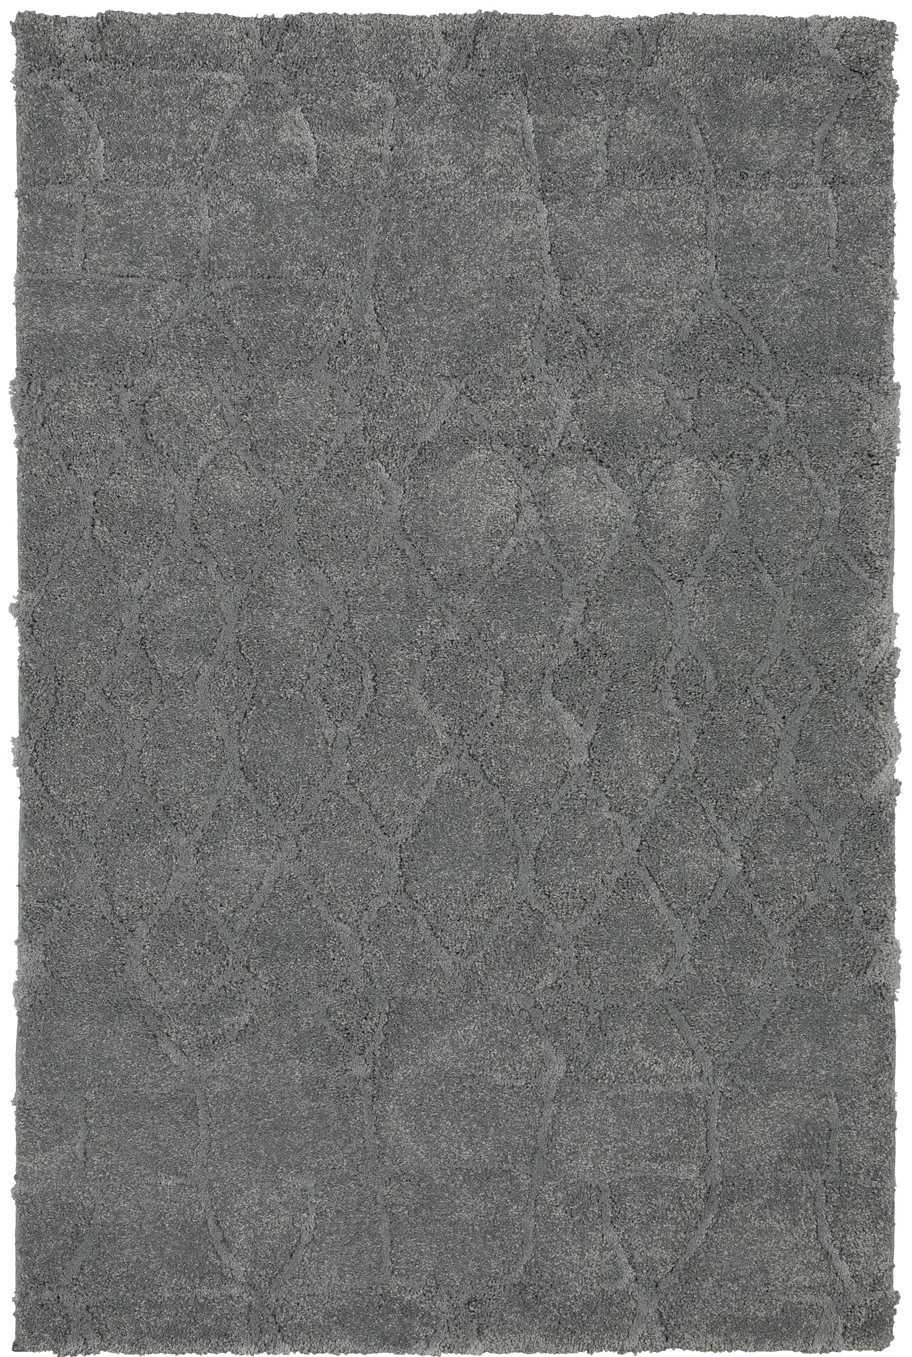 Marquee Metal Area Rug - 1 6  X 2 5 